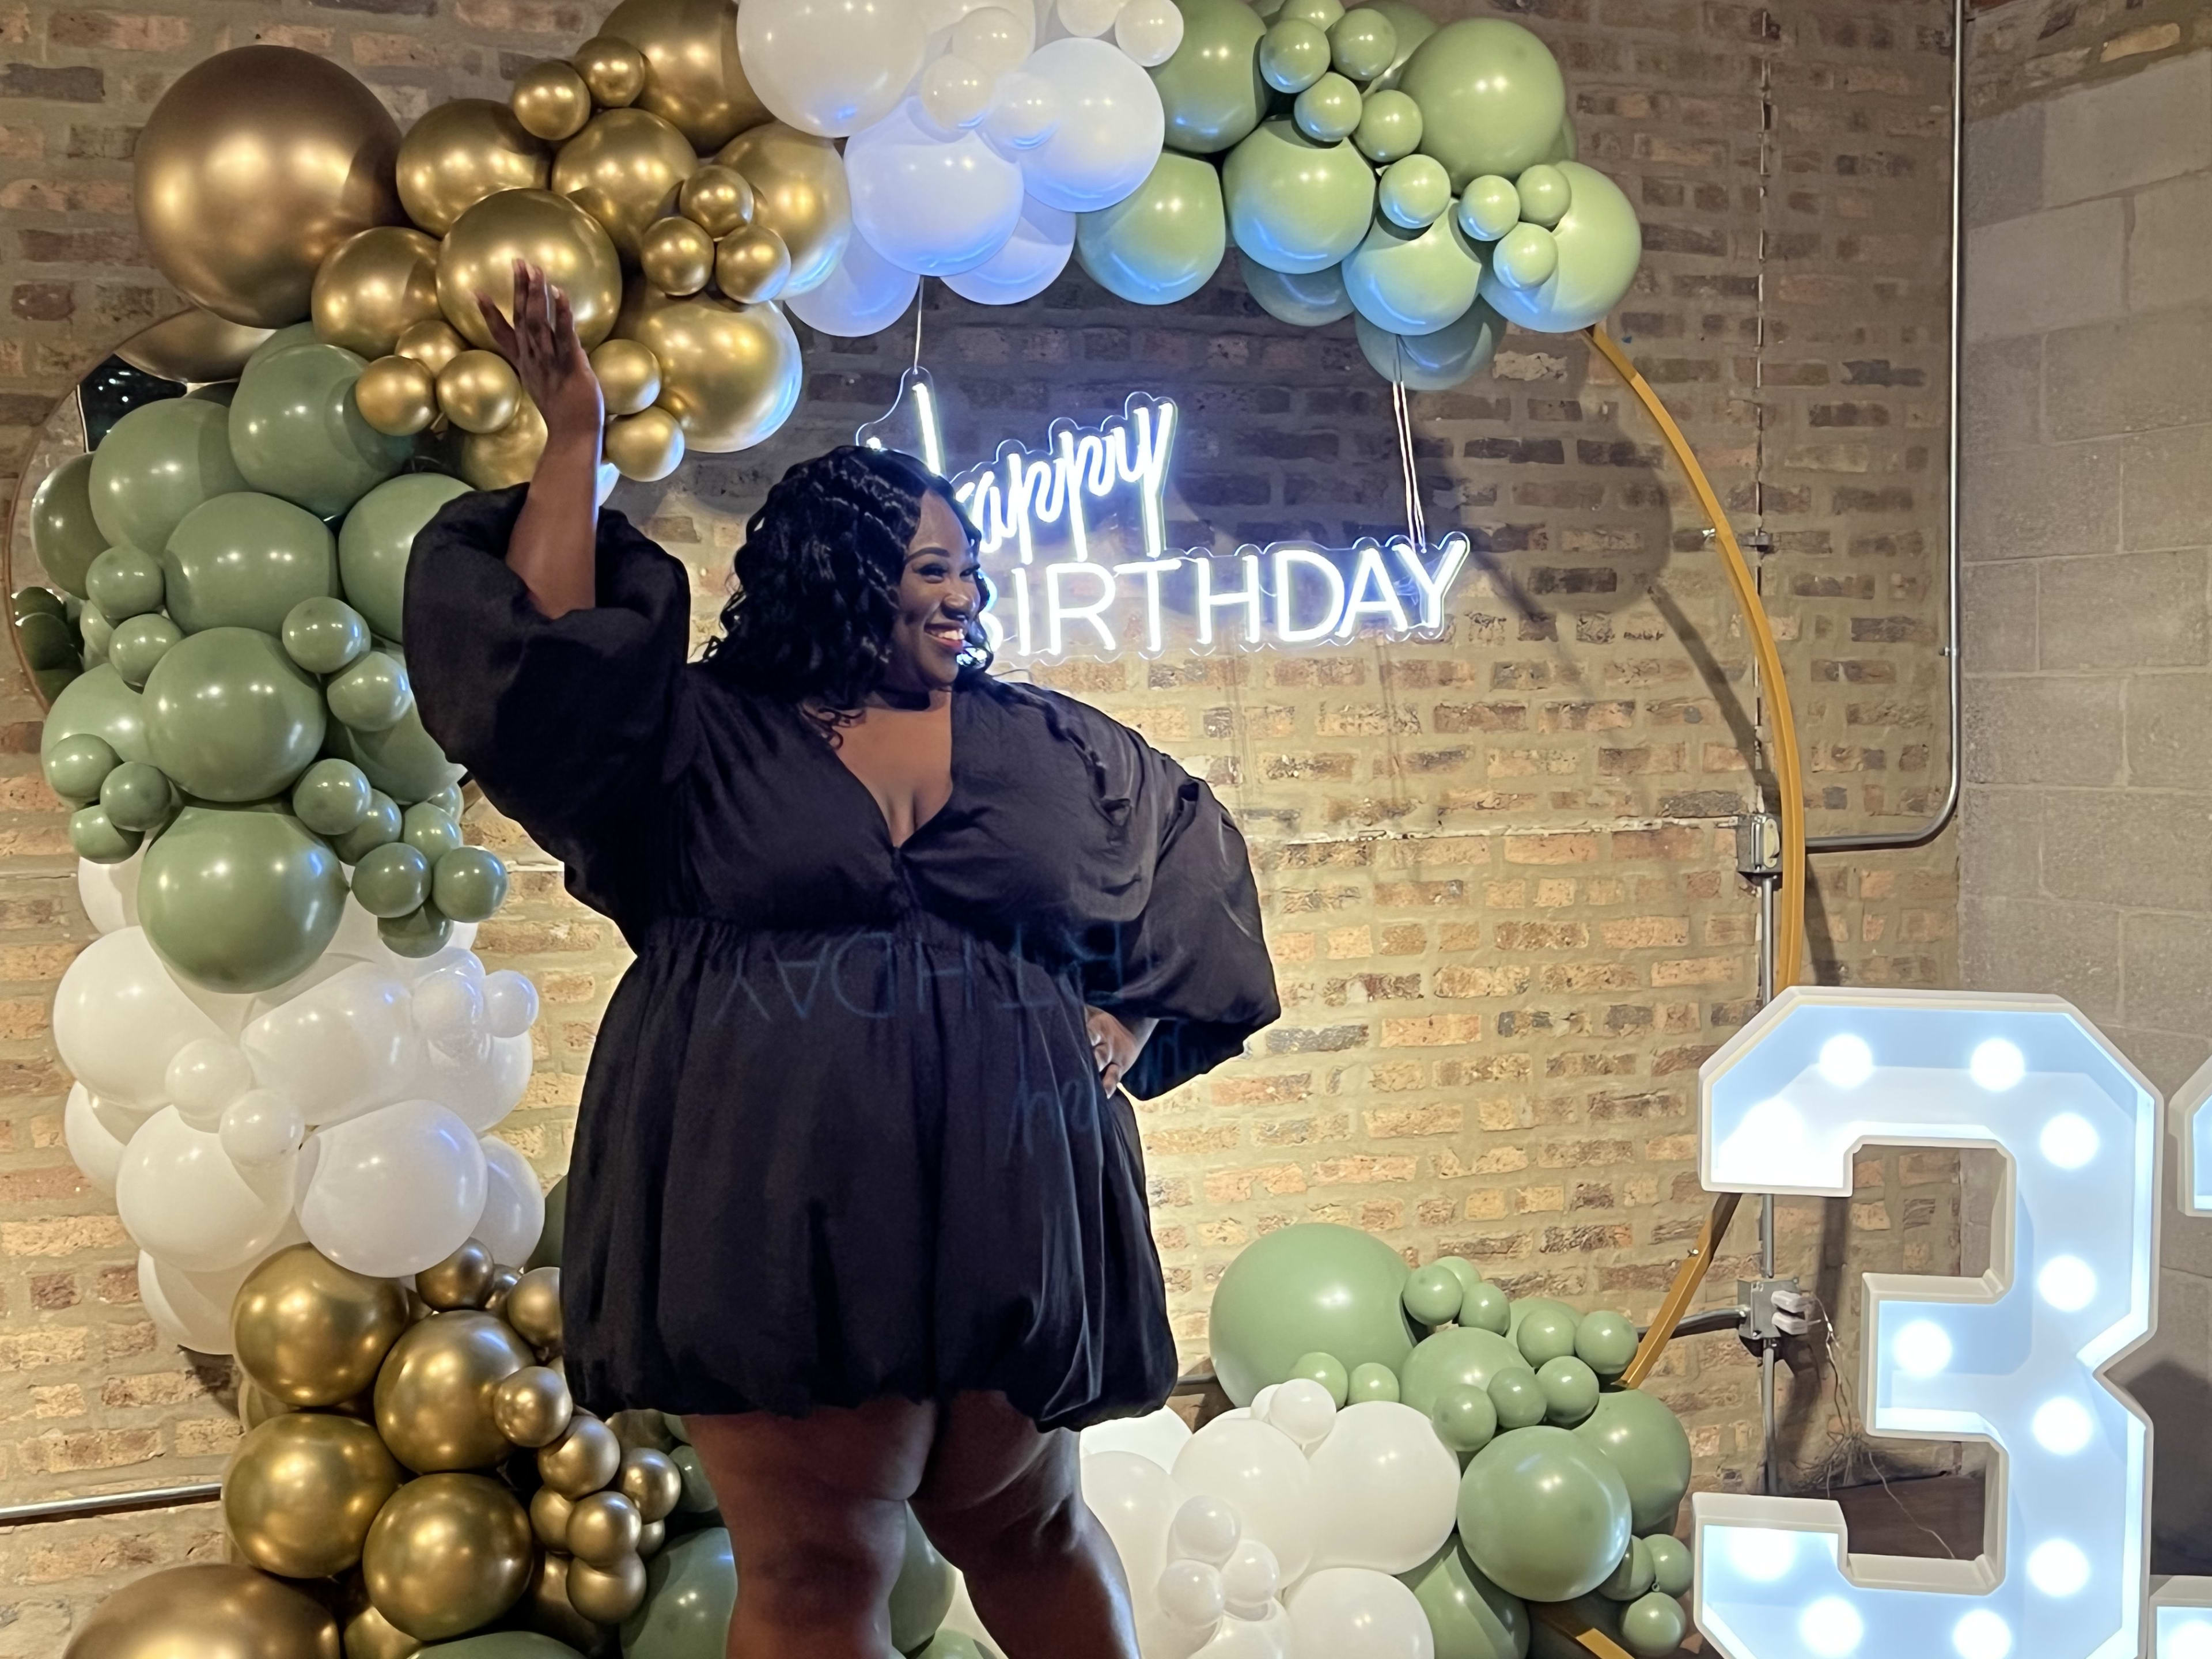 A woman in a black dress in front of balloons at a birthday party.